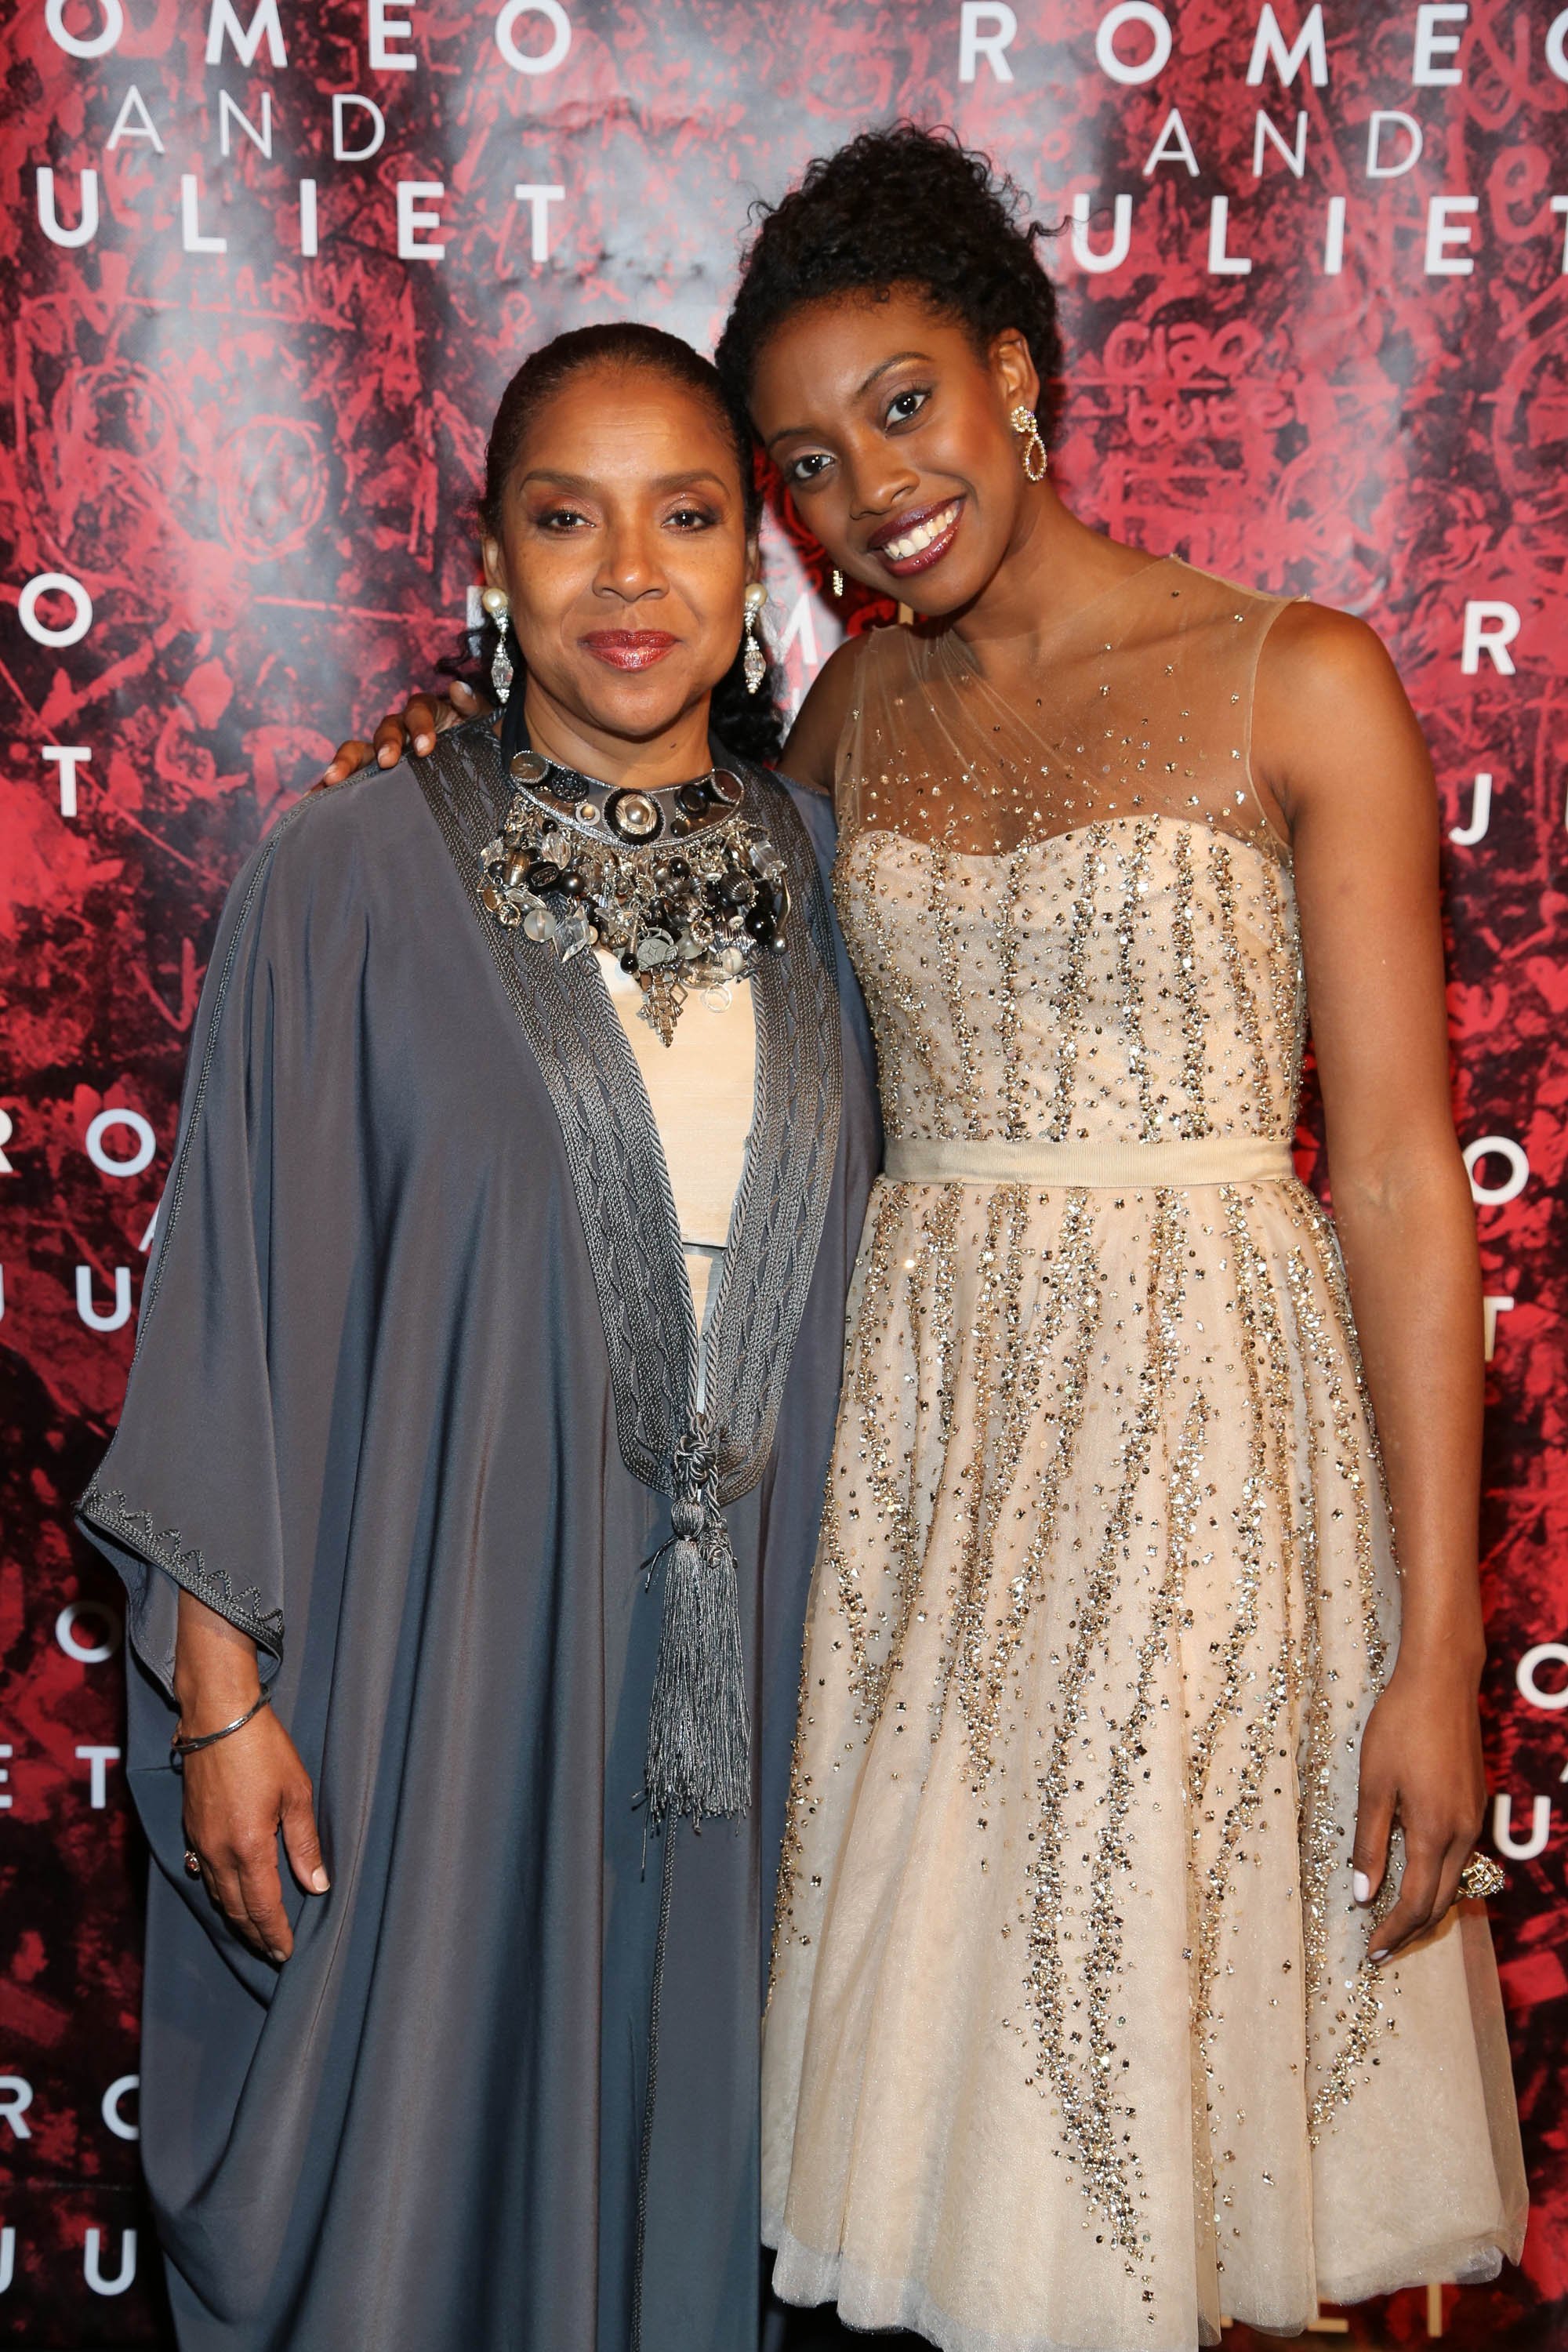  Condola Rashad and Phylicia Rashad attend "Shakespeare's Romeo And Juliet" Broadway opening night after party on September 19, 2013 | Photo: GettyImages 